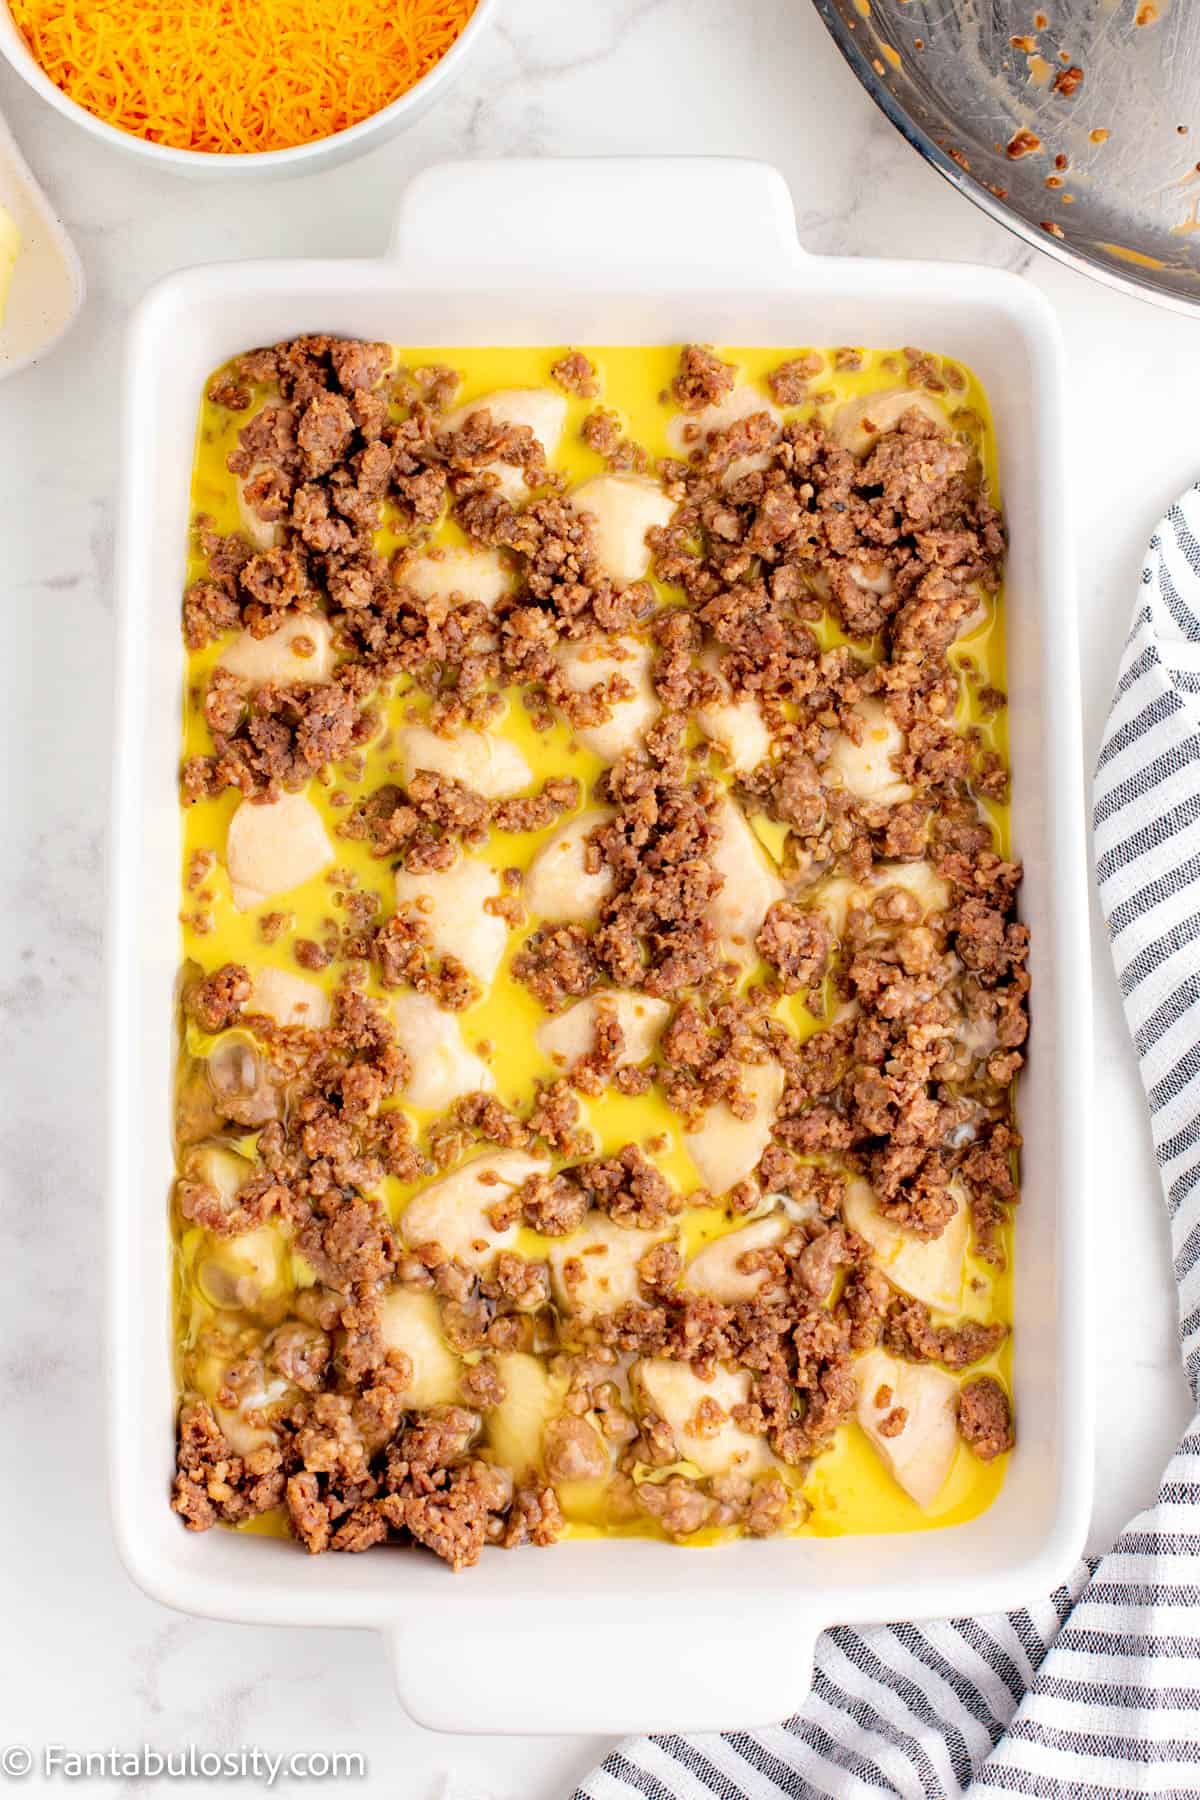 A 9x13 casserole dish with biscuits, sausage, cheese, and egg mixture in it.